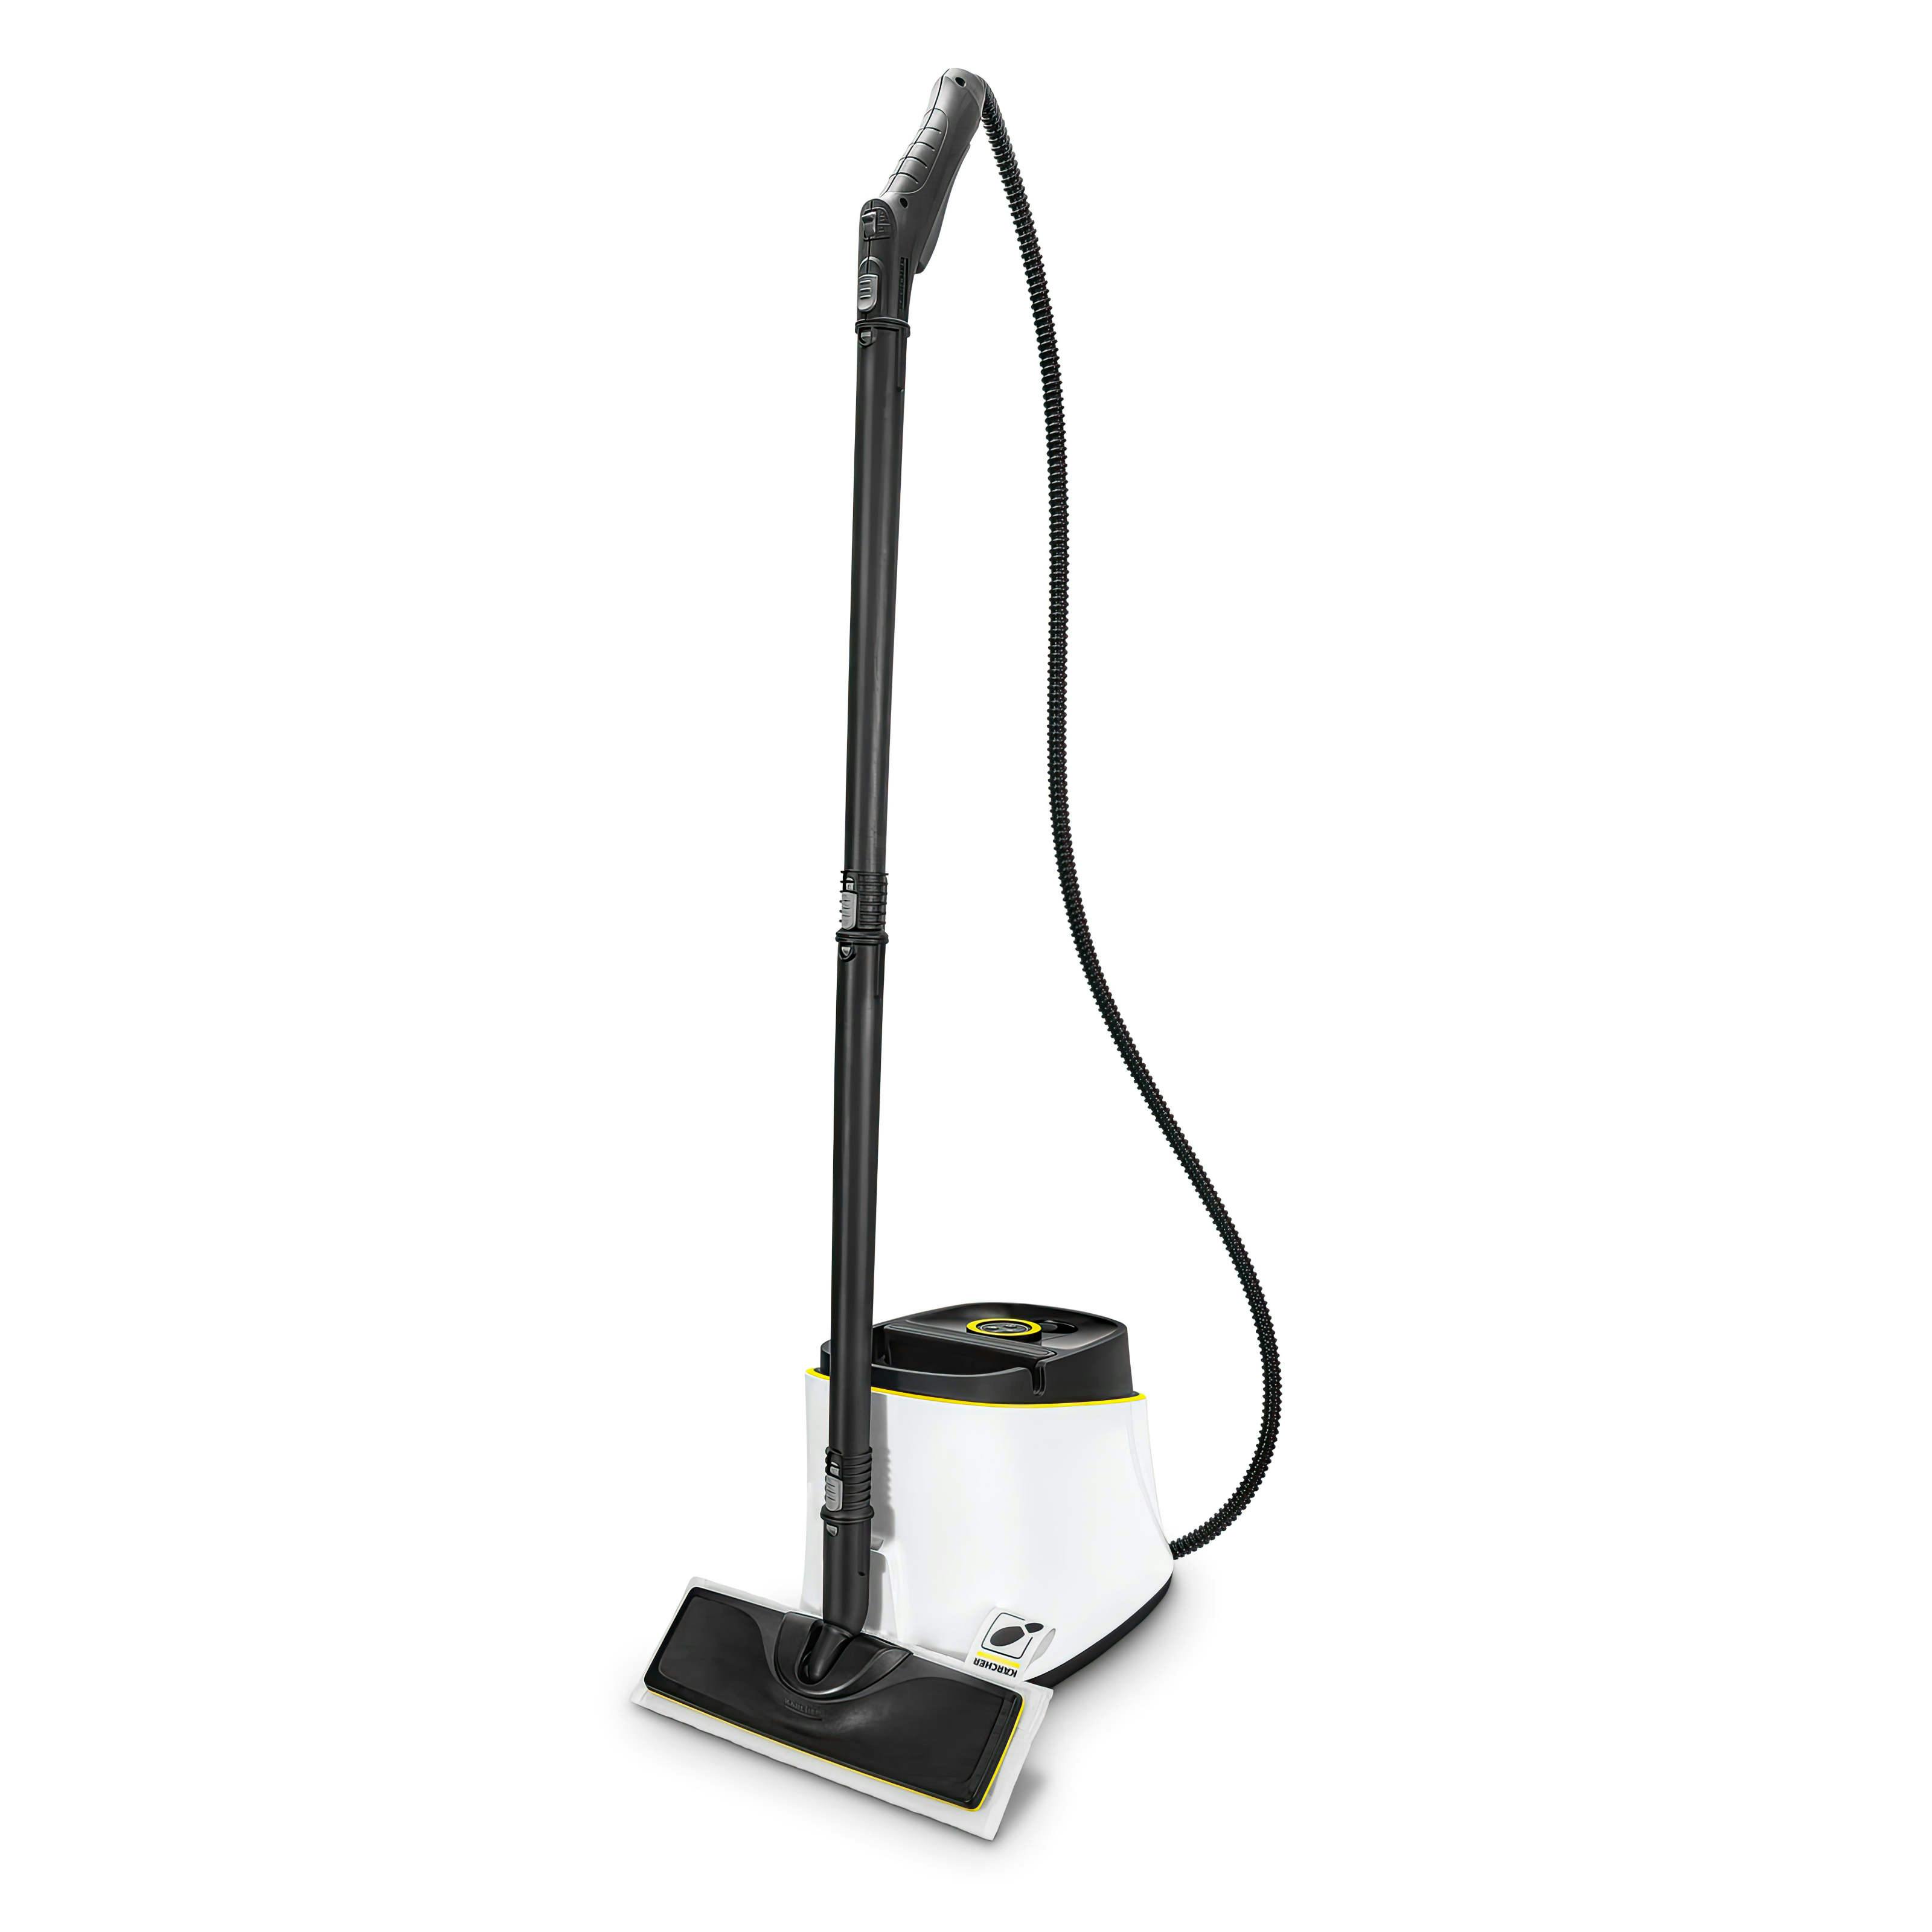 Karcher SC2 Steam Cleaner Review